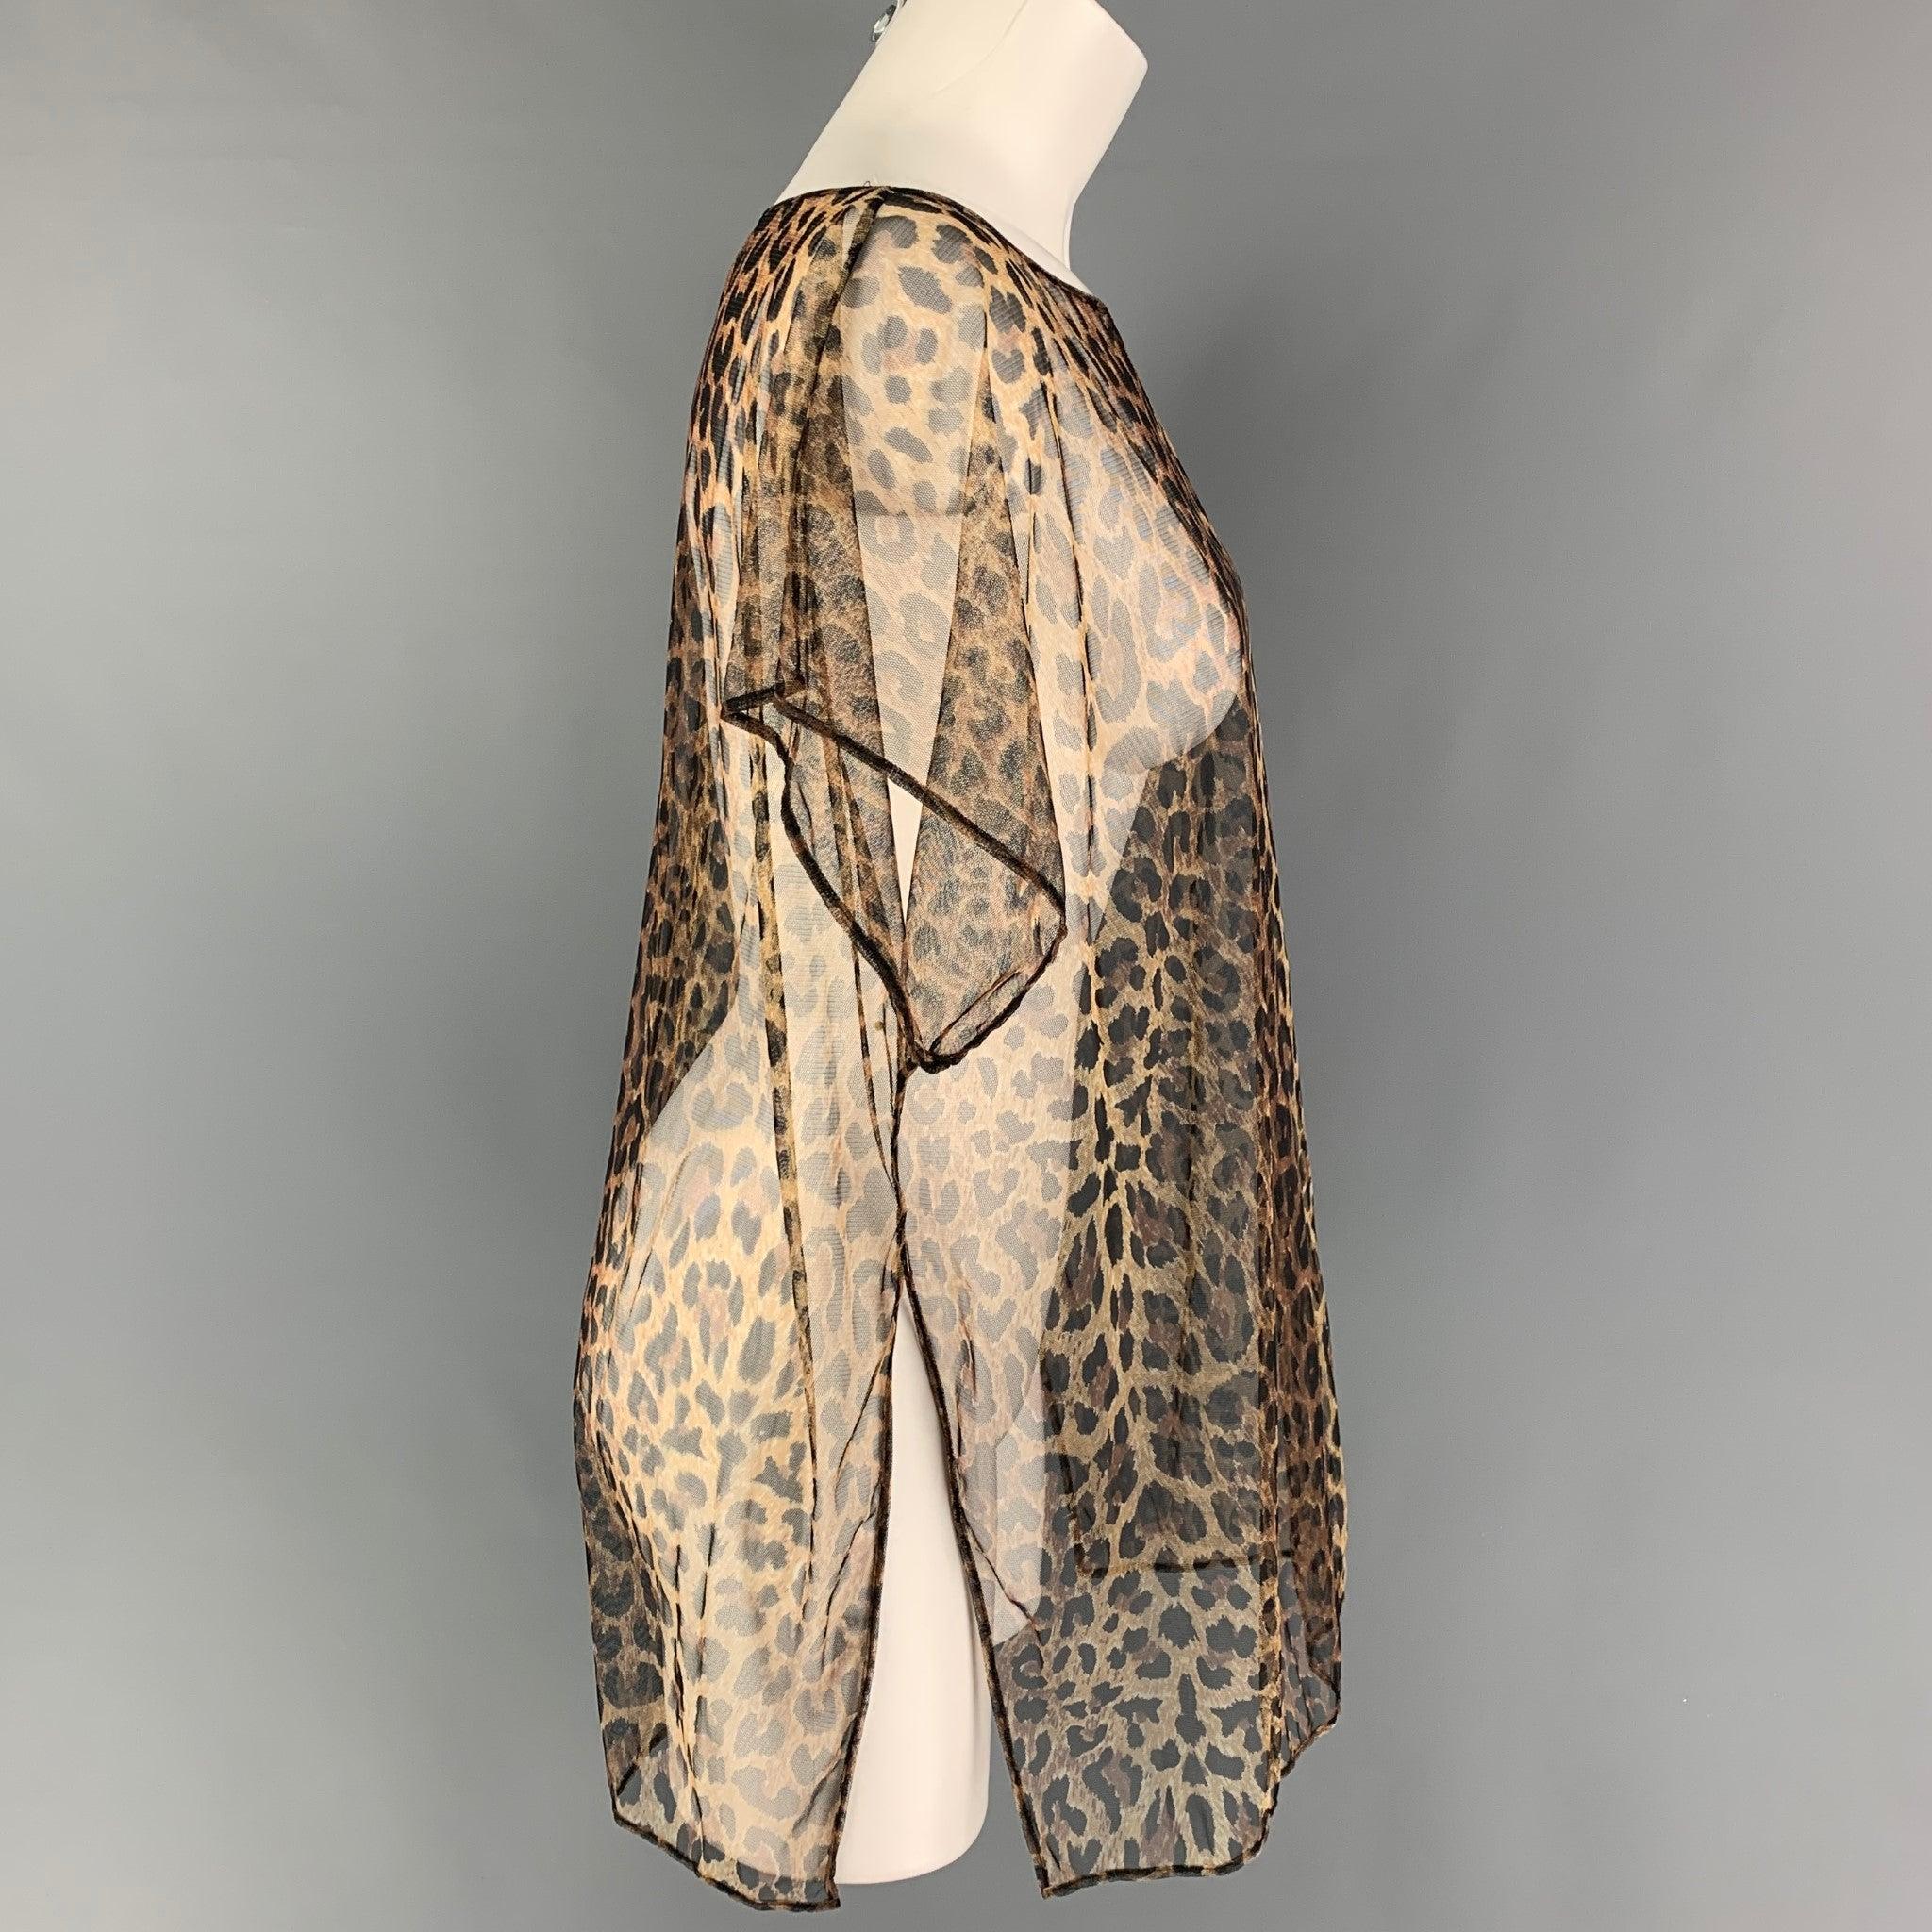 LA PERLA top comes in a black & brown animal print polyamide featuring a see through design and a bot neckline.
Made in Italy. Very Good
Pre-Owned Condition. 

Marked:   44 

Measurements: 
 
Shoulder: 16.5 inches  Bust: 48 inches  Length: 28 inches